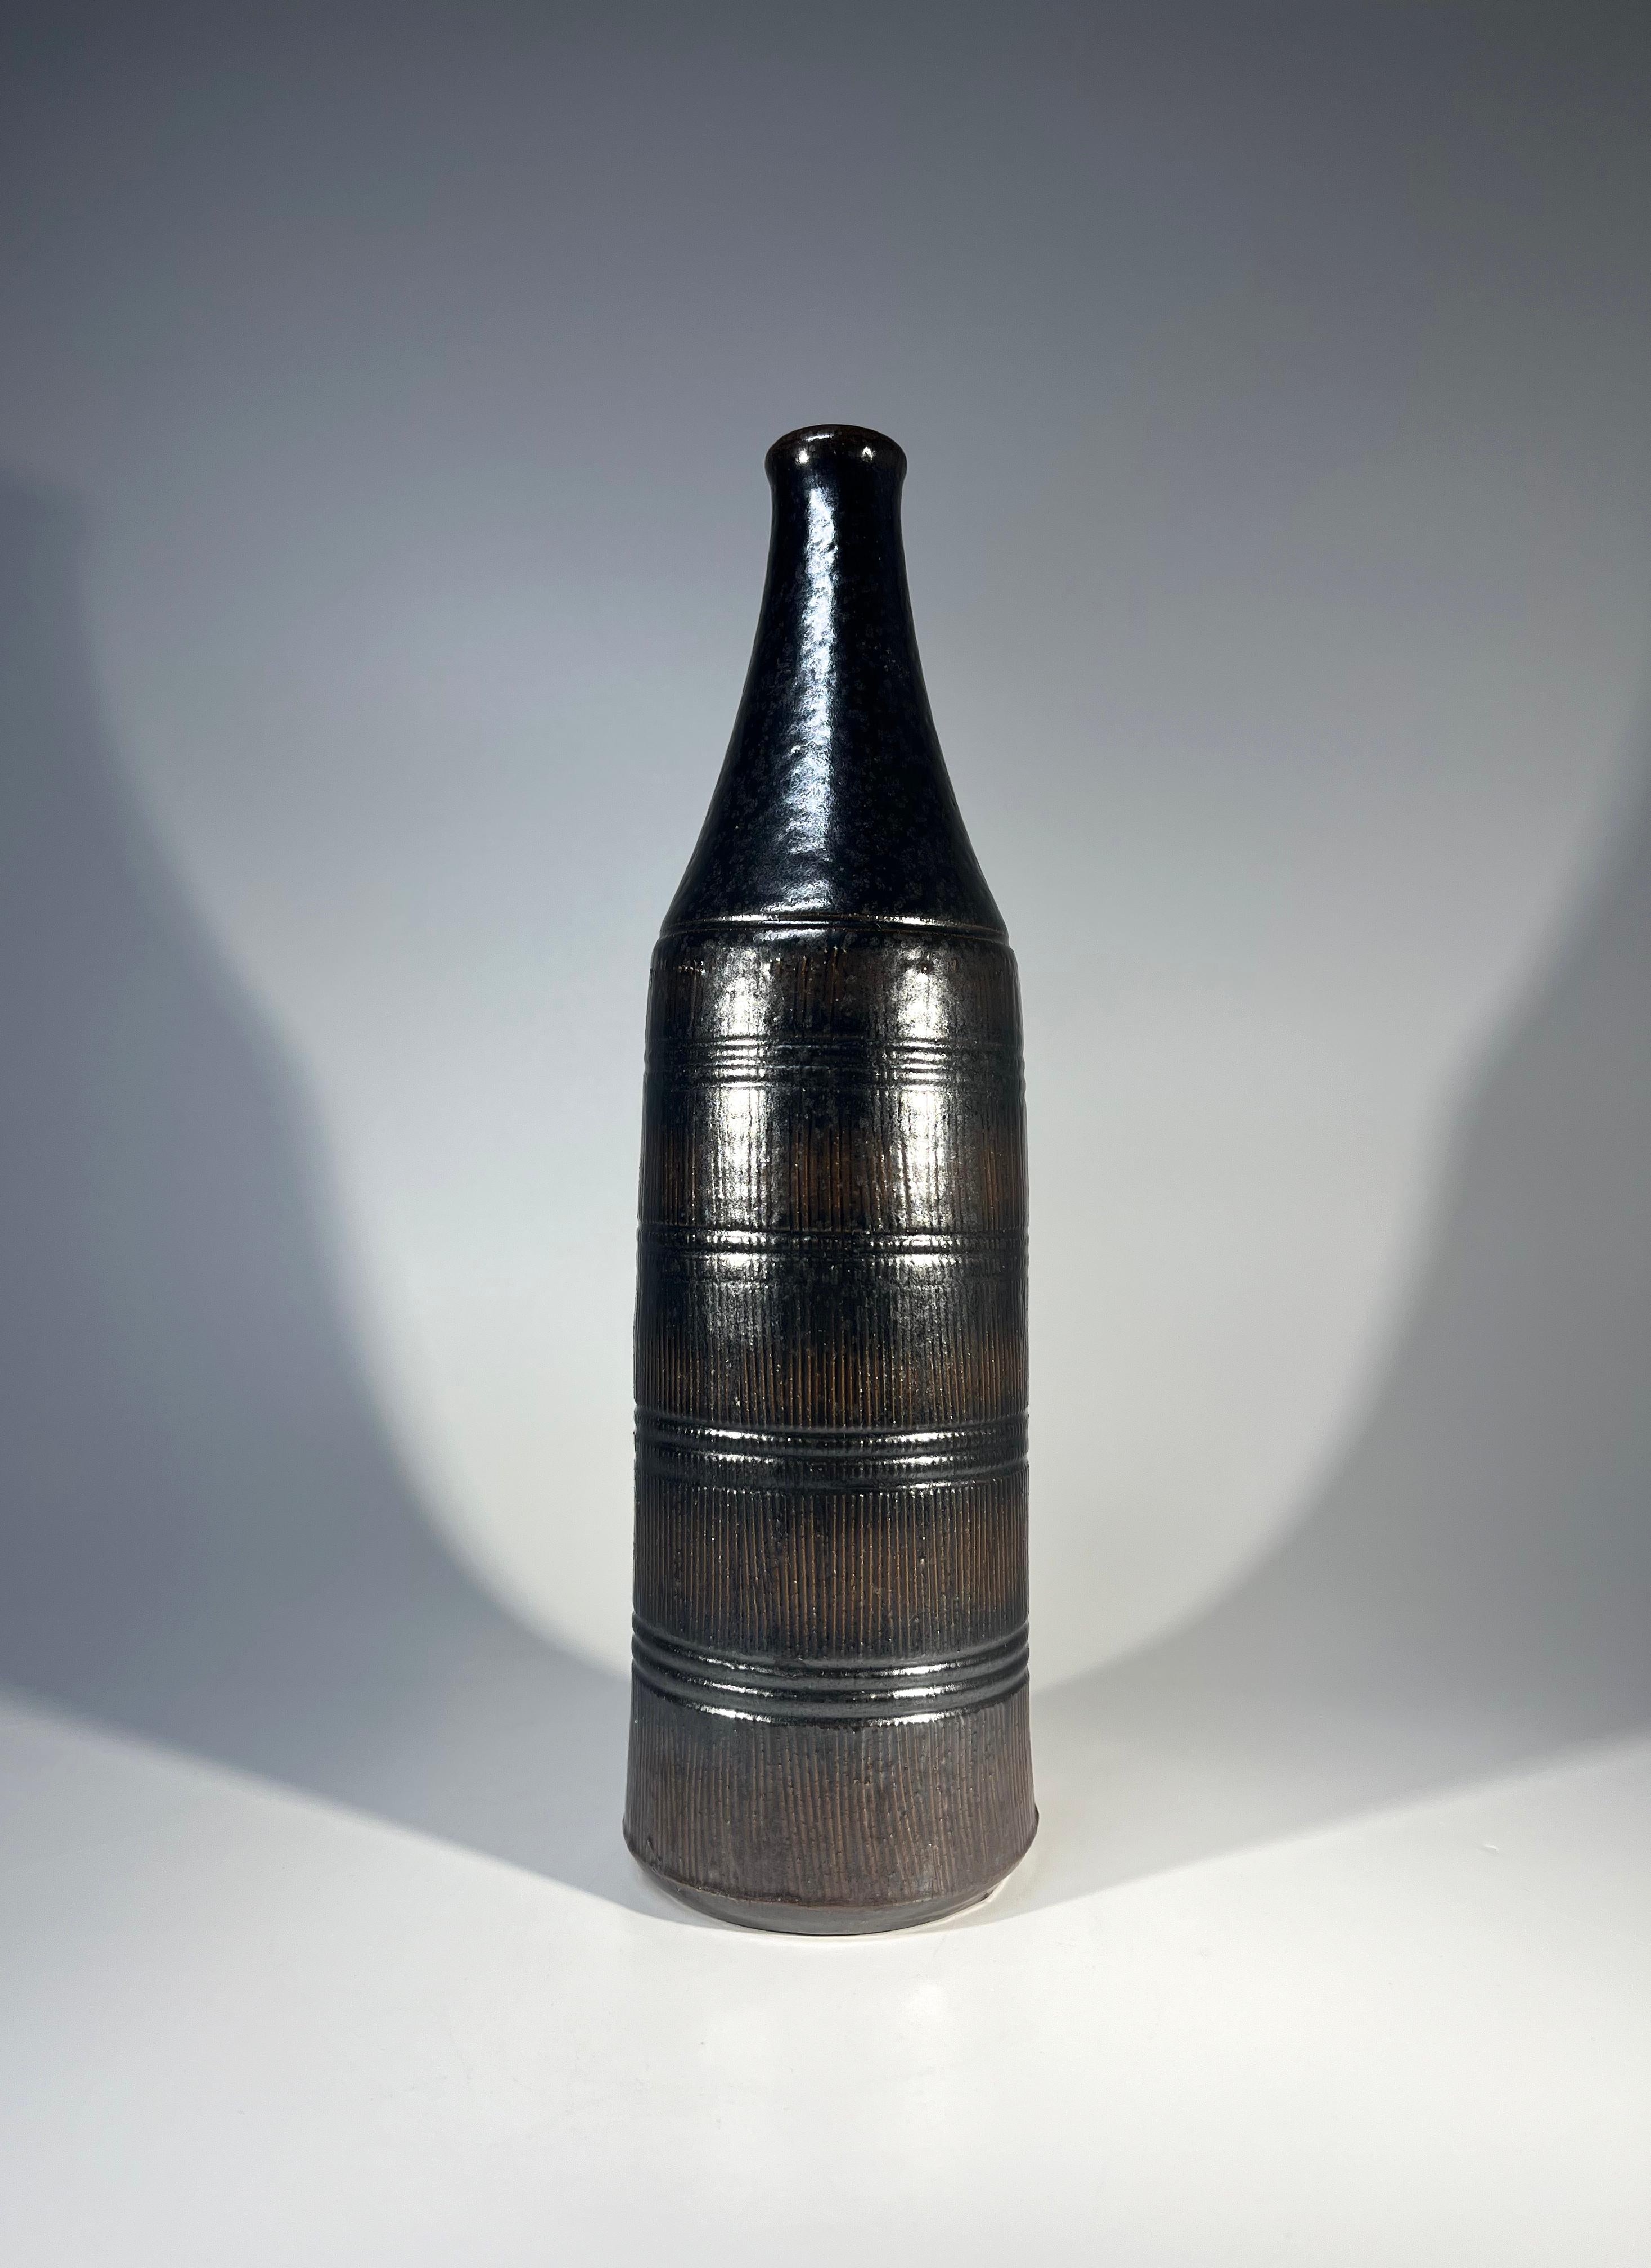 Superb stoneware bottle vase by Arthur Andersson for Wallåkra of Sweden
Tactile and appealing, with an Intense dark coffee brown and black glaze over incised decoration
Circa 1950's
Signed Wallåkra to base
Height 9.5 inch, Diameter 2.75 inch
In